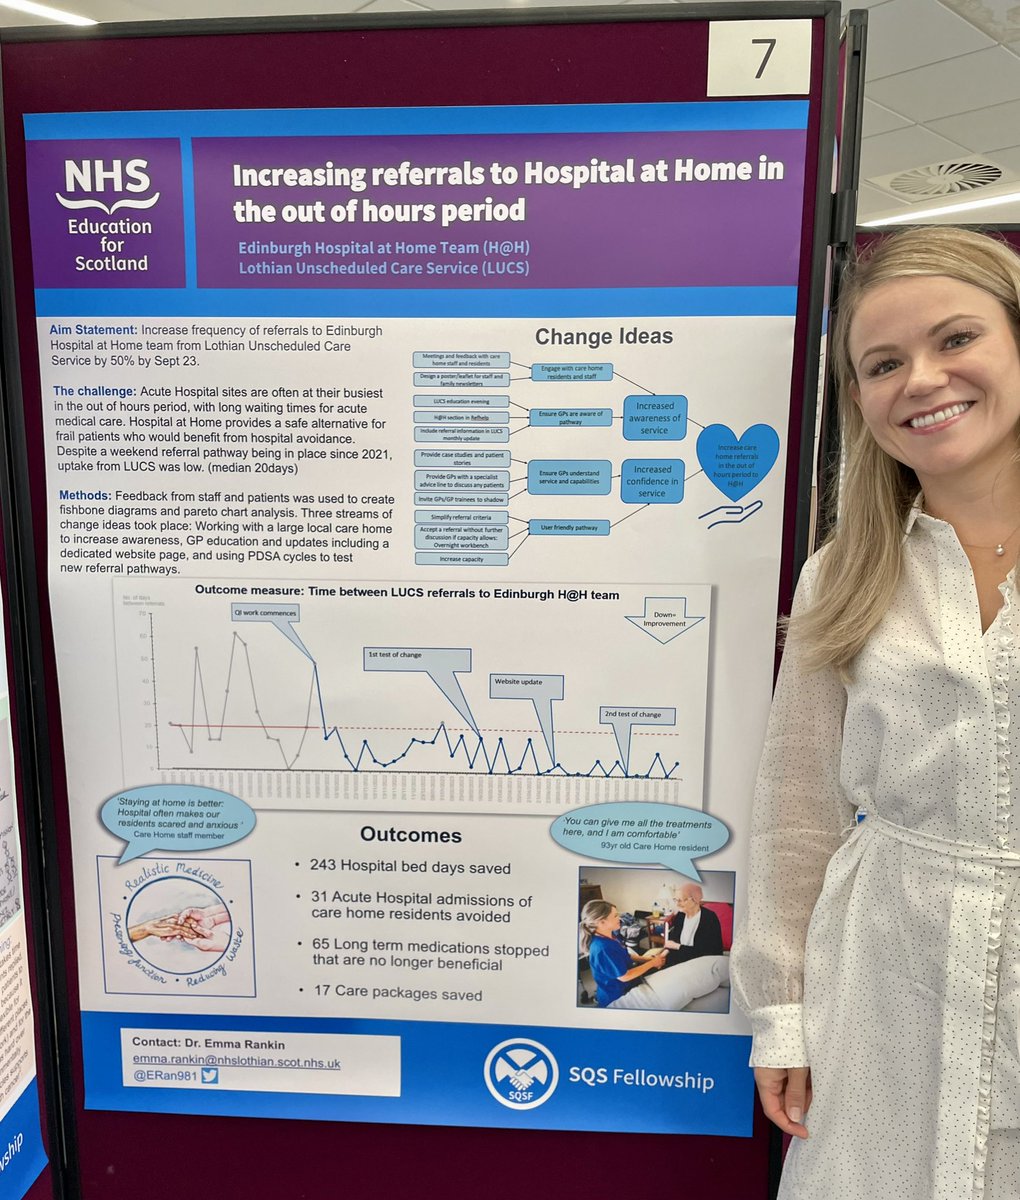 So excited to share my learning tomorrow, poster looking good! 👍

Thank you to everyone that helped:@Thecoulls297 , Dr. Armstrong, @GreenDrRJ and the fabulous LUCS and Edinburgh Hospital at home teams.💕
#LUCS #Hospitalathome #SQSFellowship